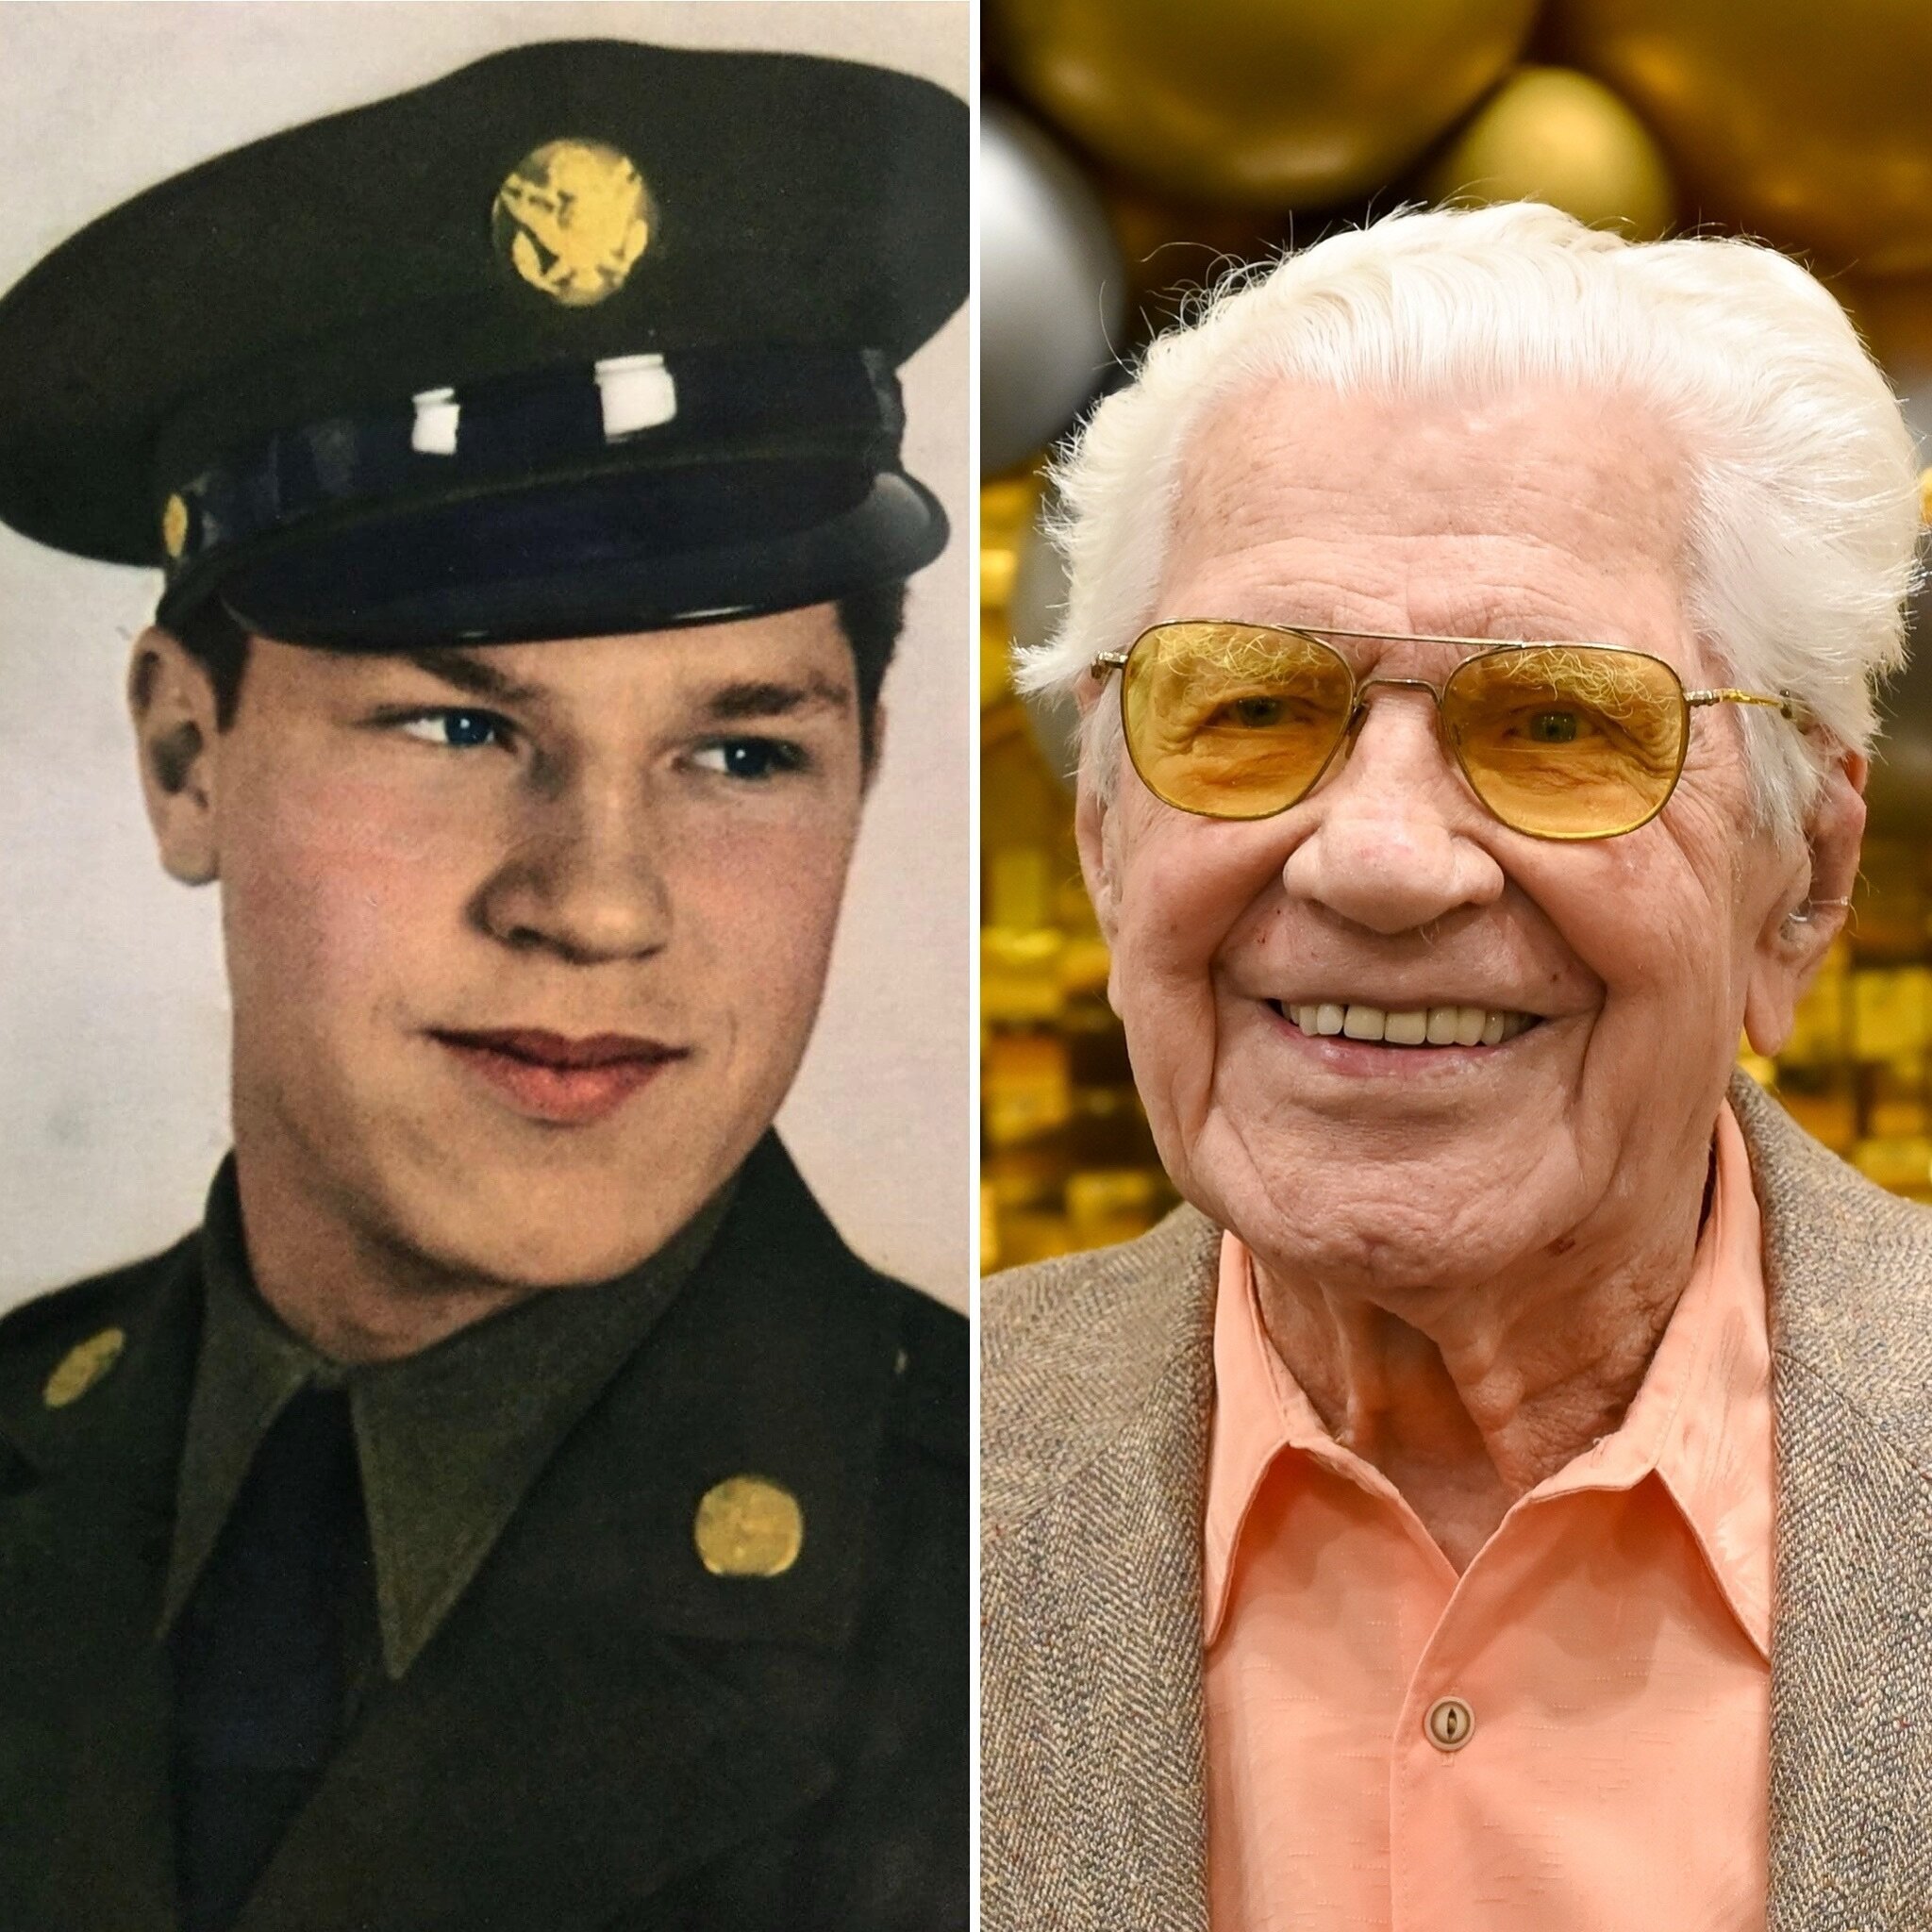 The WWII Veterans History Project mourns the loss of Frank Klum, WWII veteran of the 12th Air Force, who passed away Monday at age 101.

Nine years ago, in the Summer of 2015, Frank was the second veteran interviewed for the WWII Veterans History Pro